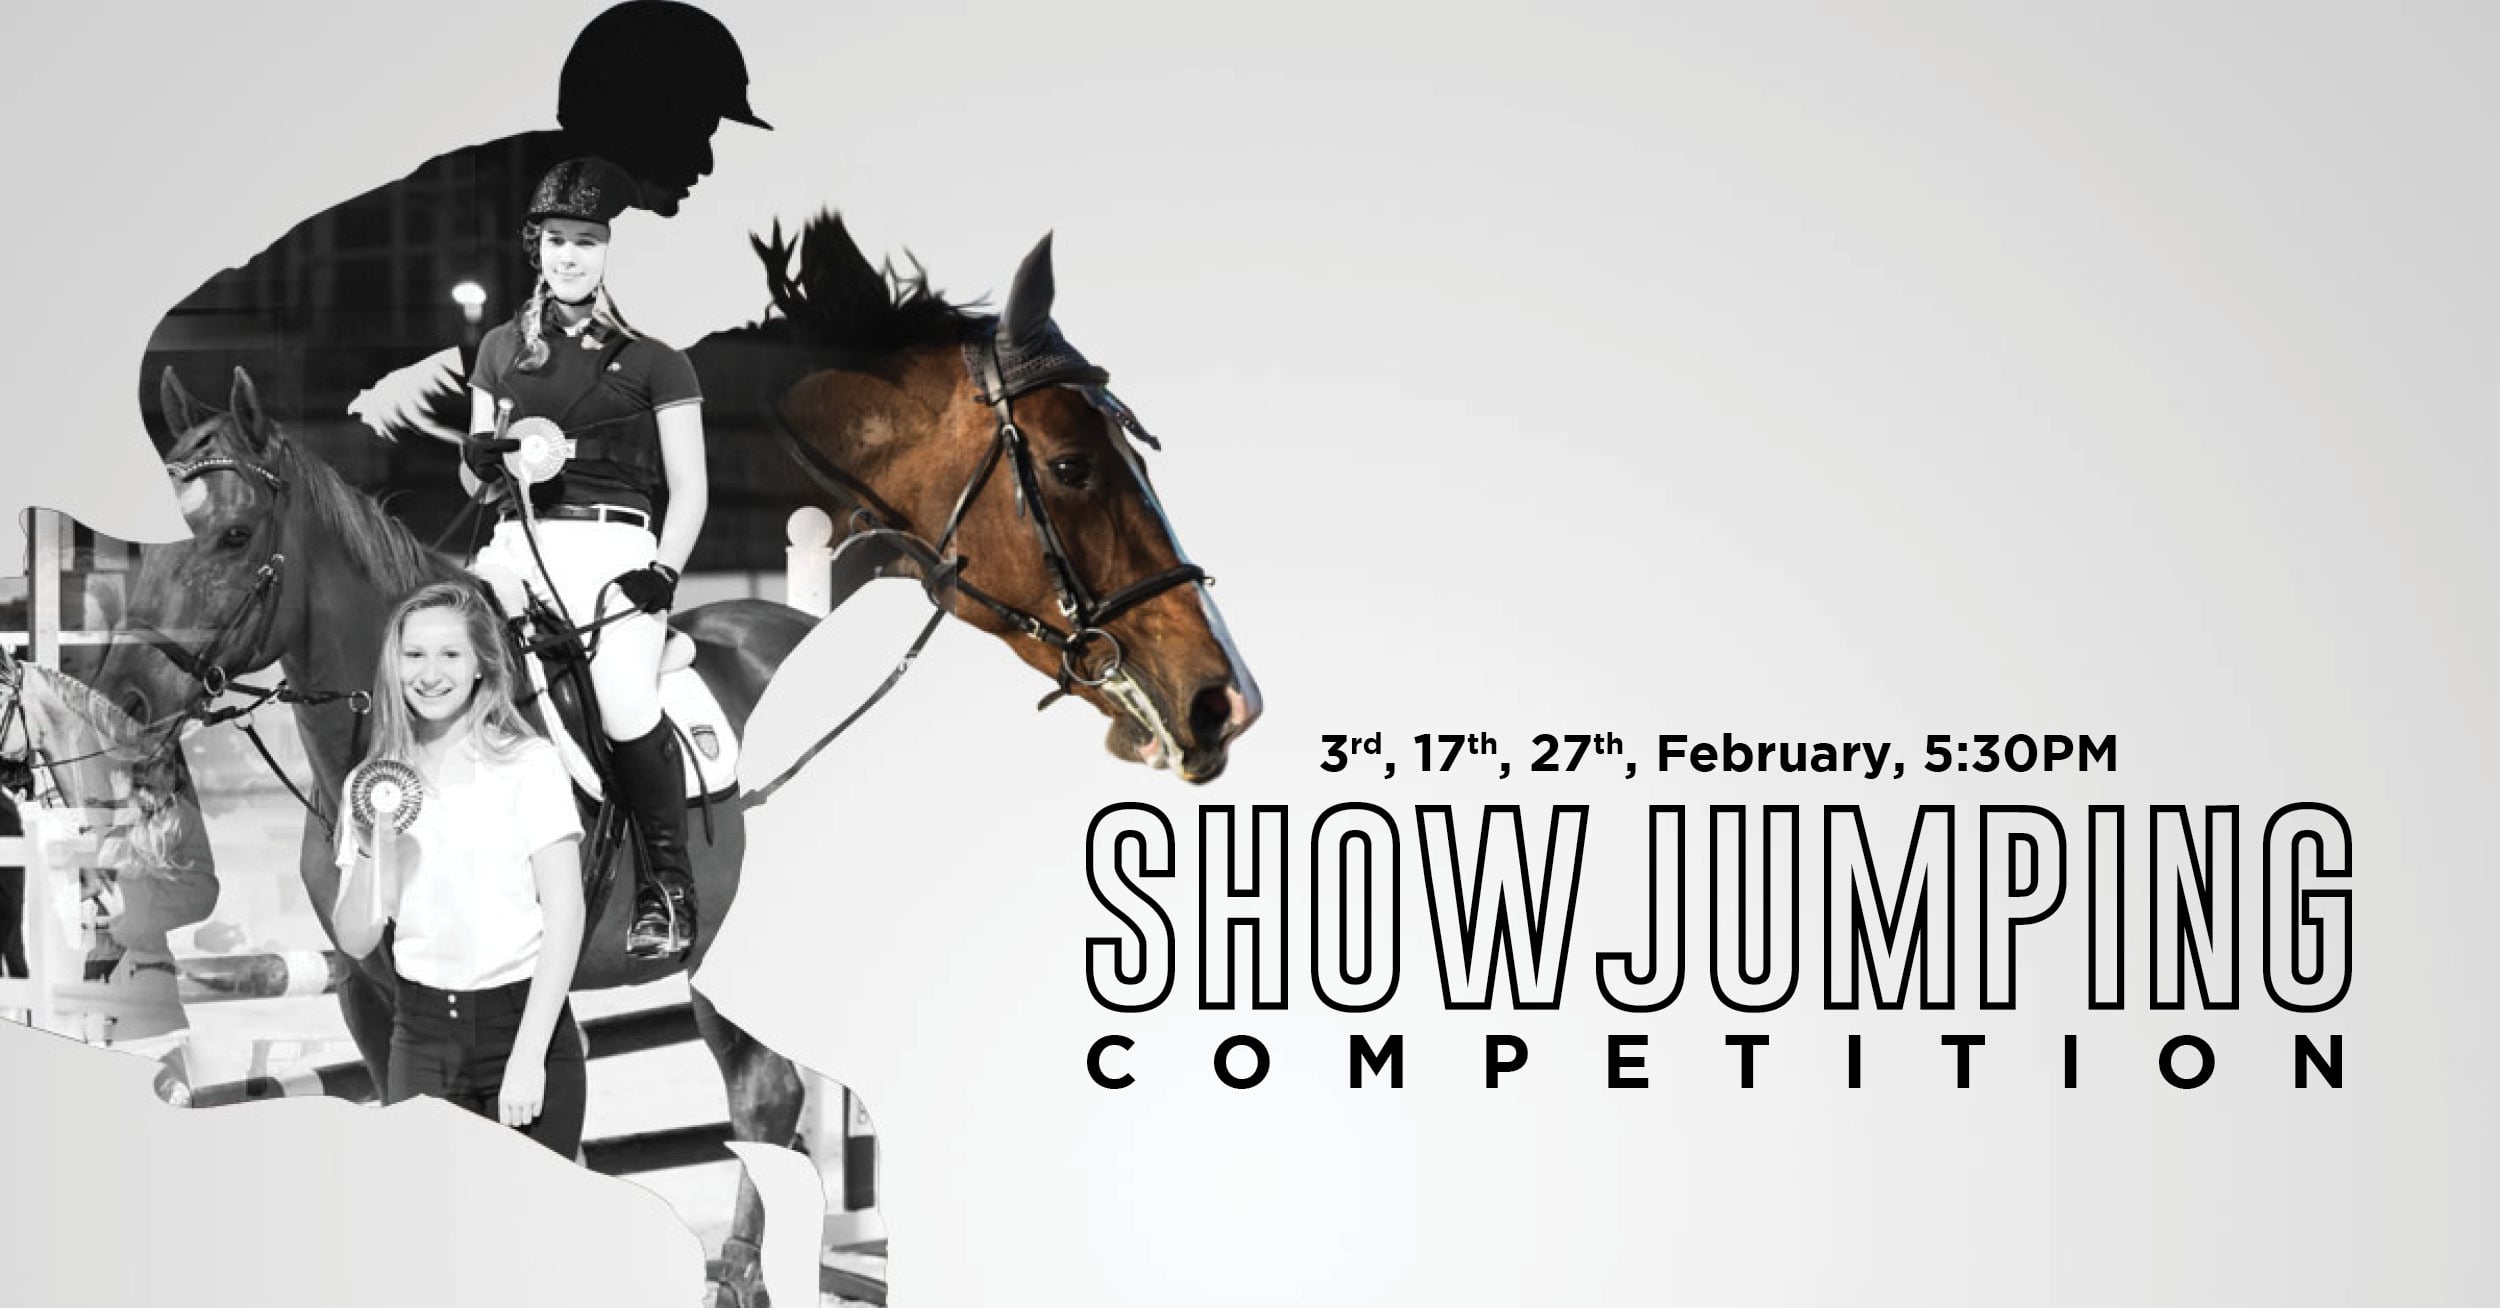 AHPRC Showjumping Competition Feb 2021 Series - Coming Soon in UAE